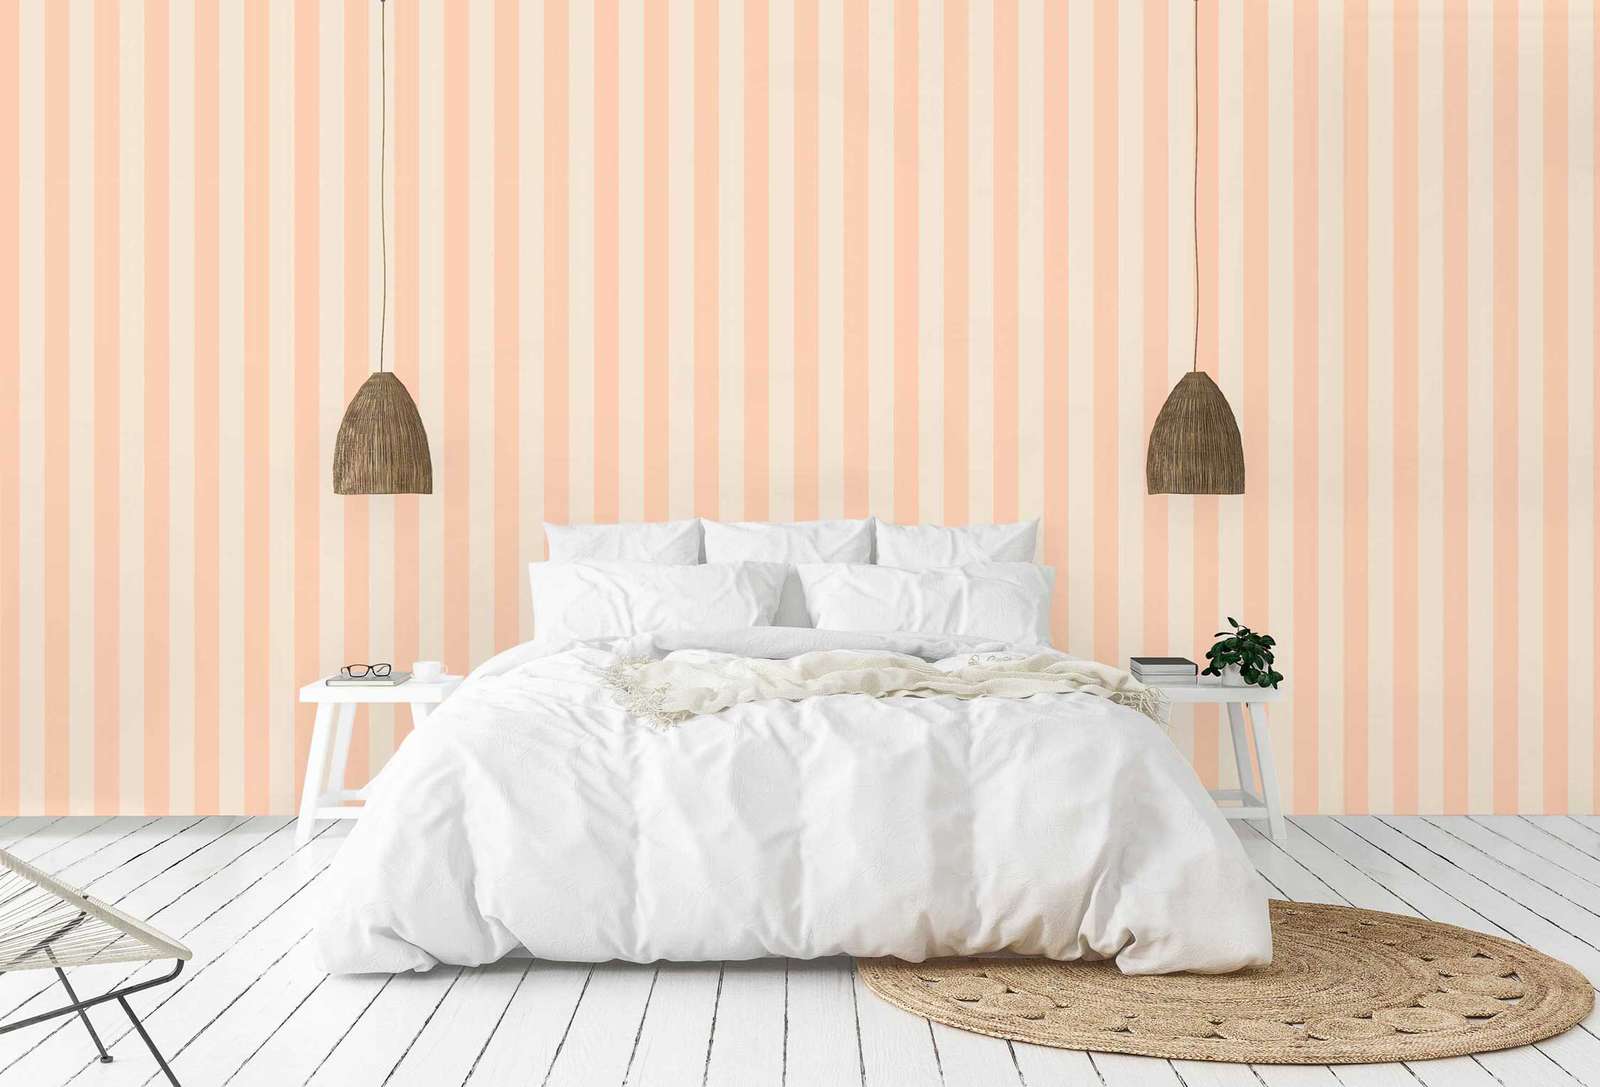             Non-woven wallpaper with block stripes in soft shades - cream, pink
        